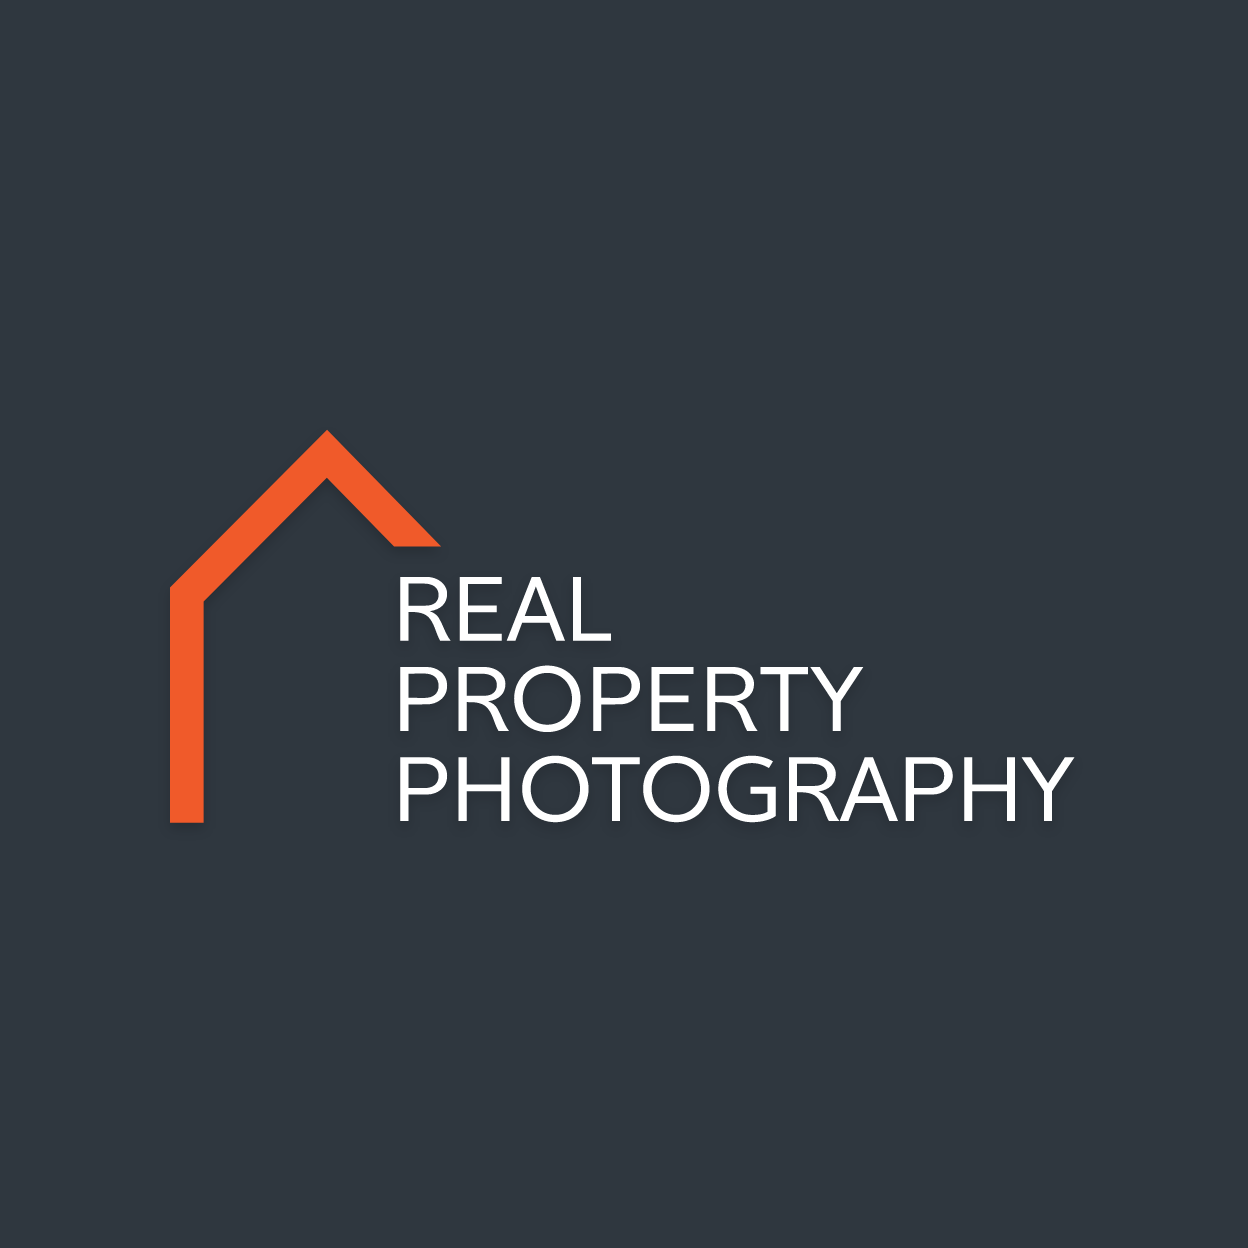 Real Property Photography Logo